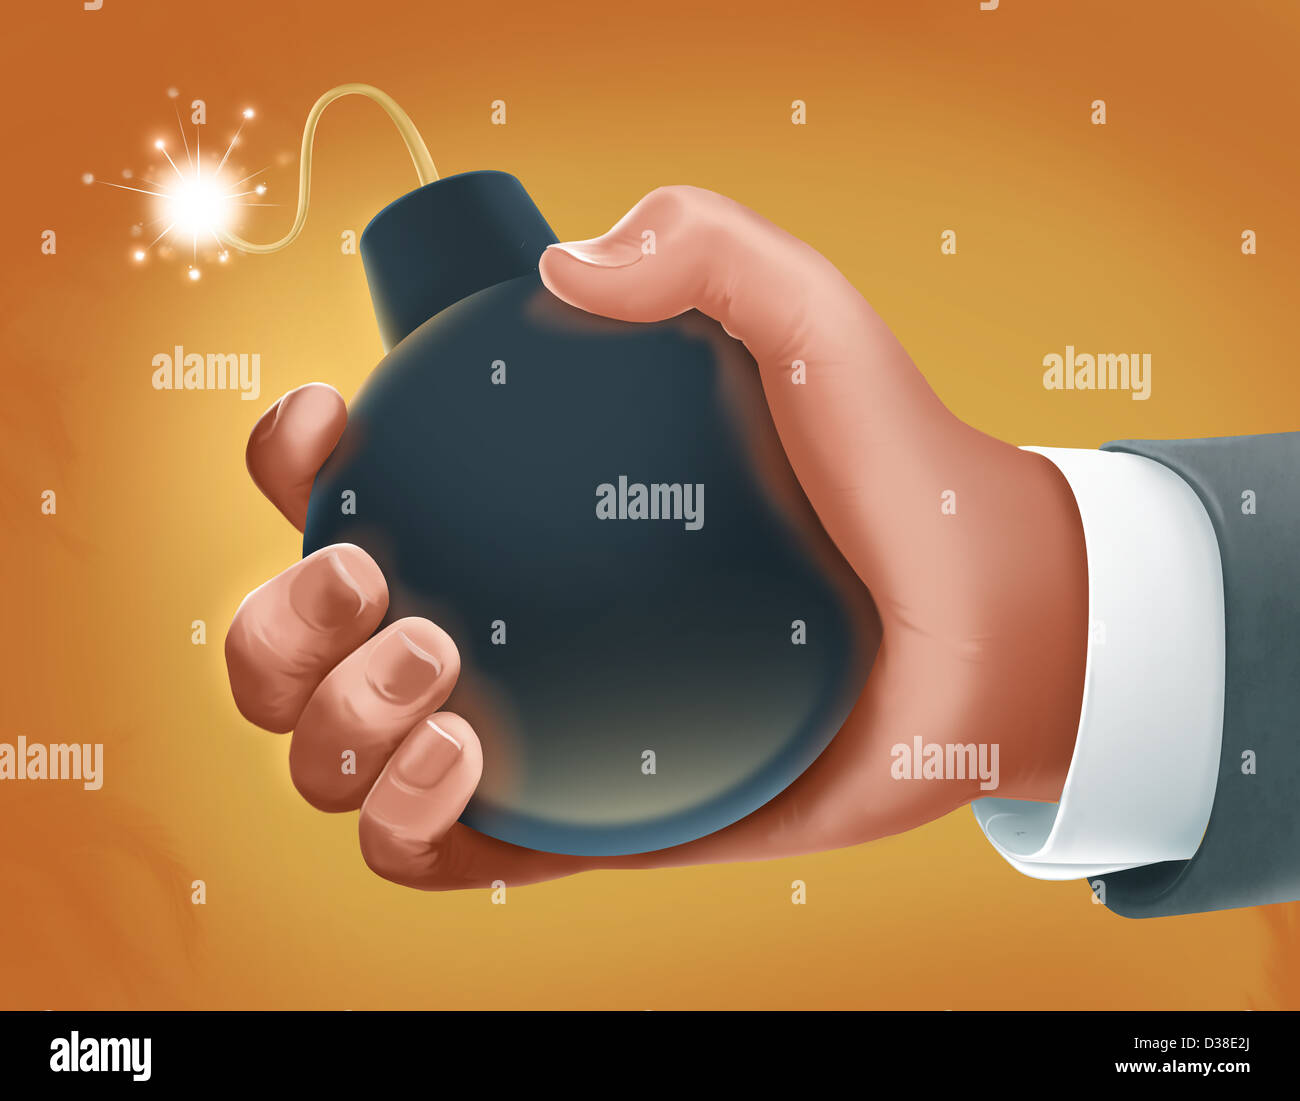 Illustrative image of hand holding bomb representing business crisis Stock Photo